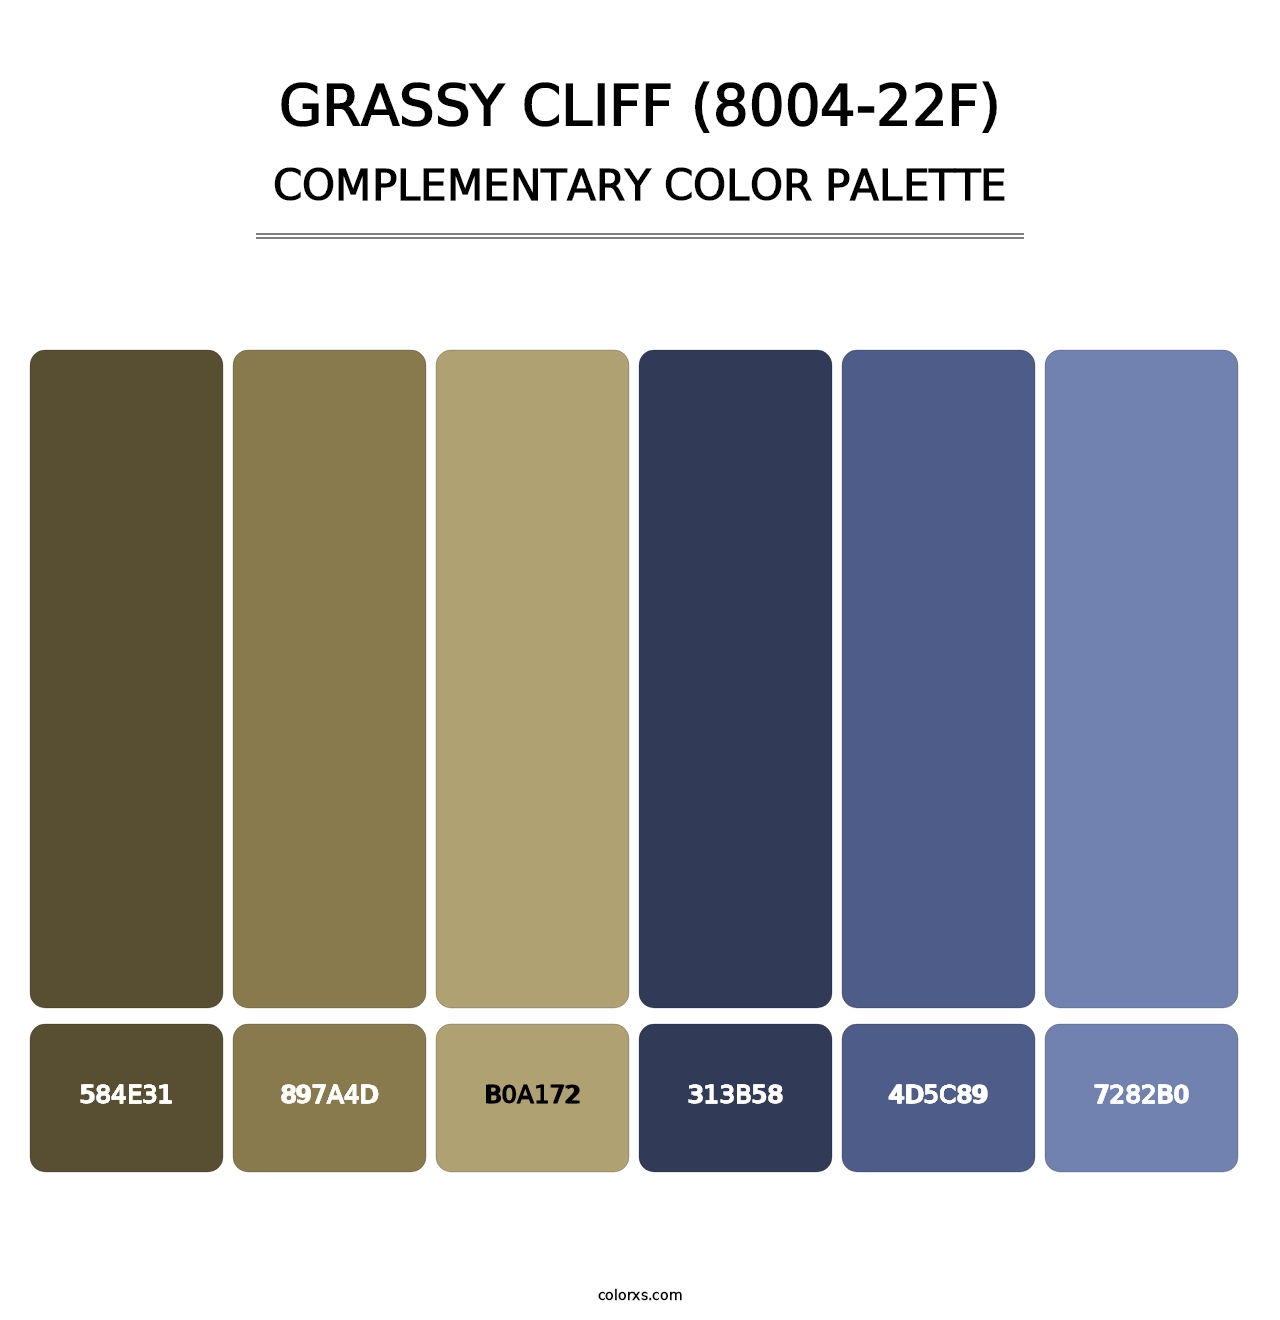 Grassy Cliff (8004-22F) - Complementary Color Palette